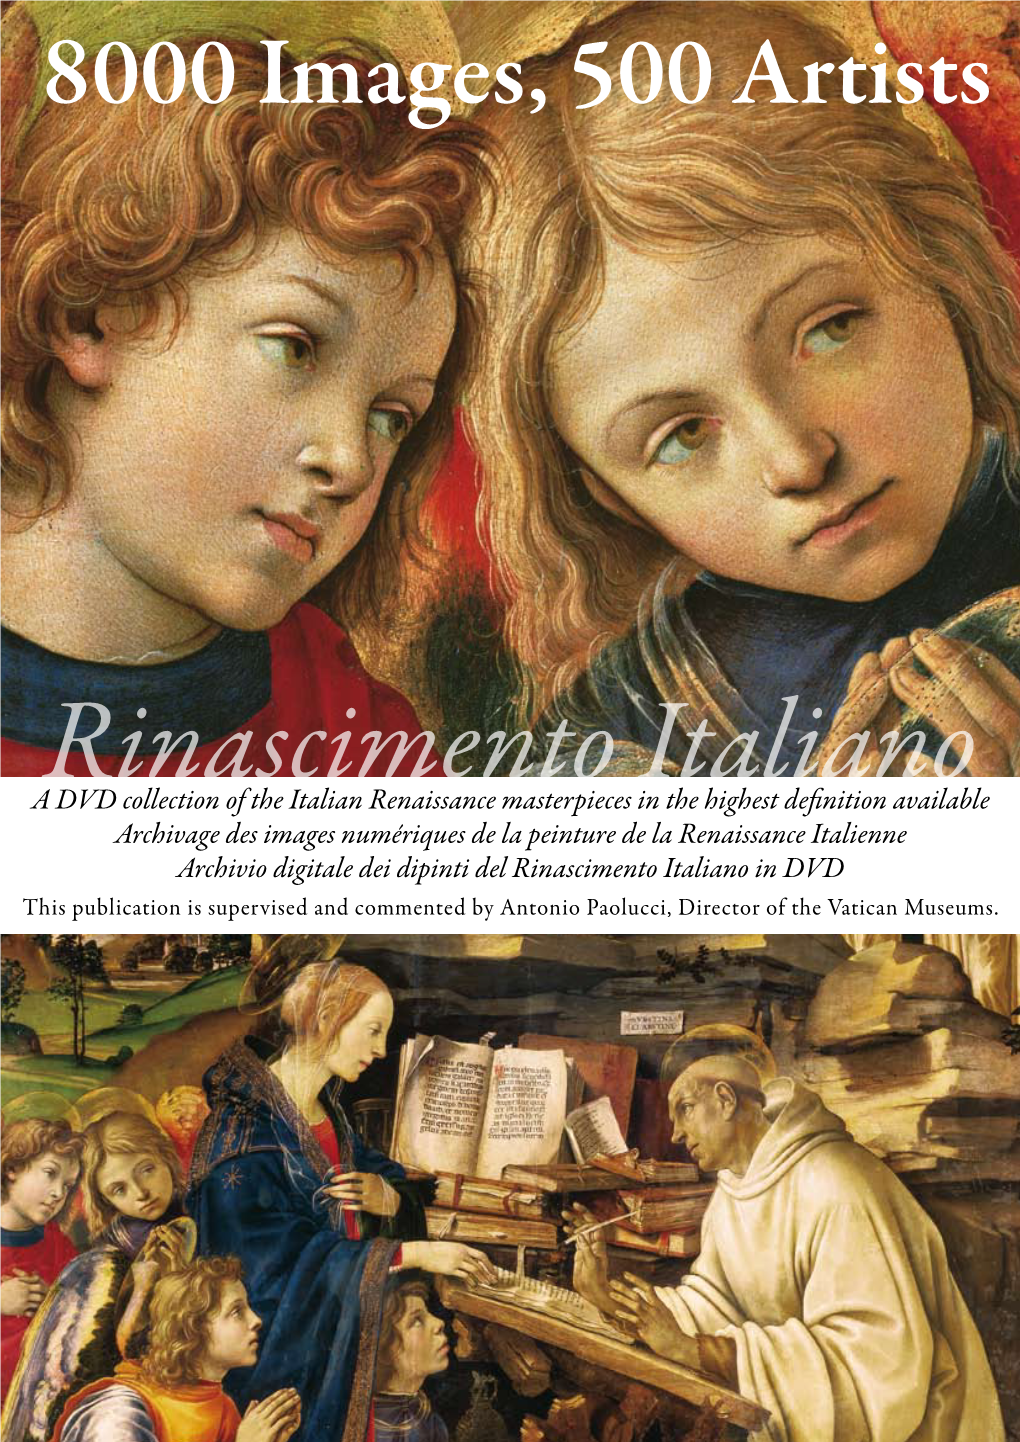 Rinascimento Italiano in DVD This Publication Is Supervised and Commented by Antonio Paolucci, Director of the Vatican Museums